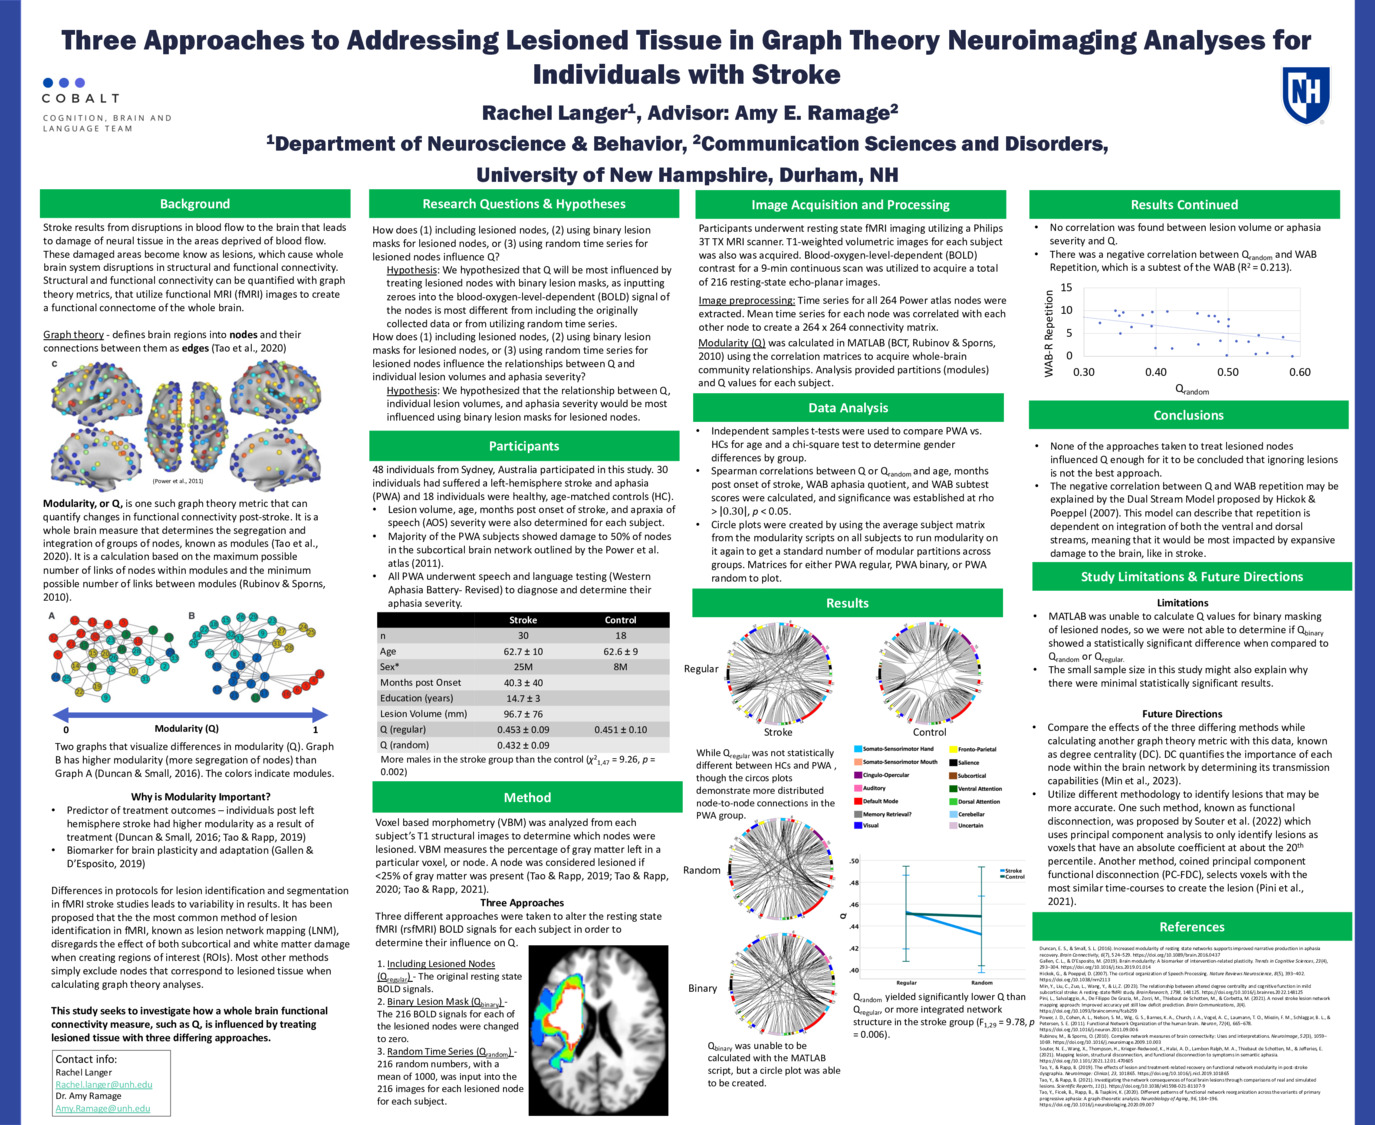 Three Approaches To Addressing Lesioned Tissue In Graph Theory Neuroimaging Analyses For Individuals With Stroke by rdl1022